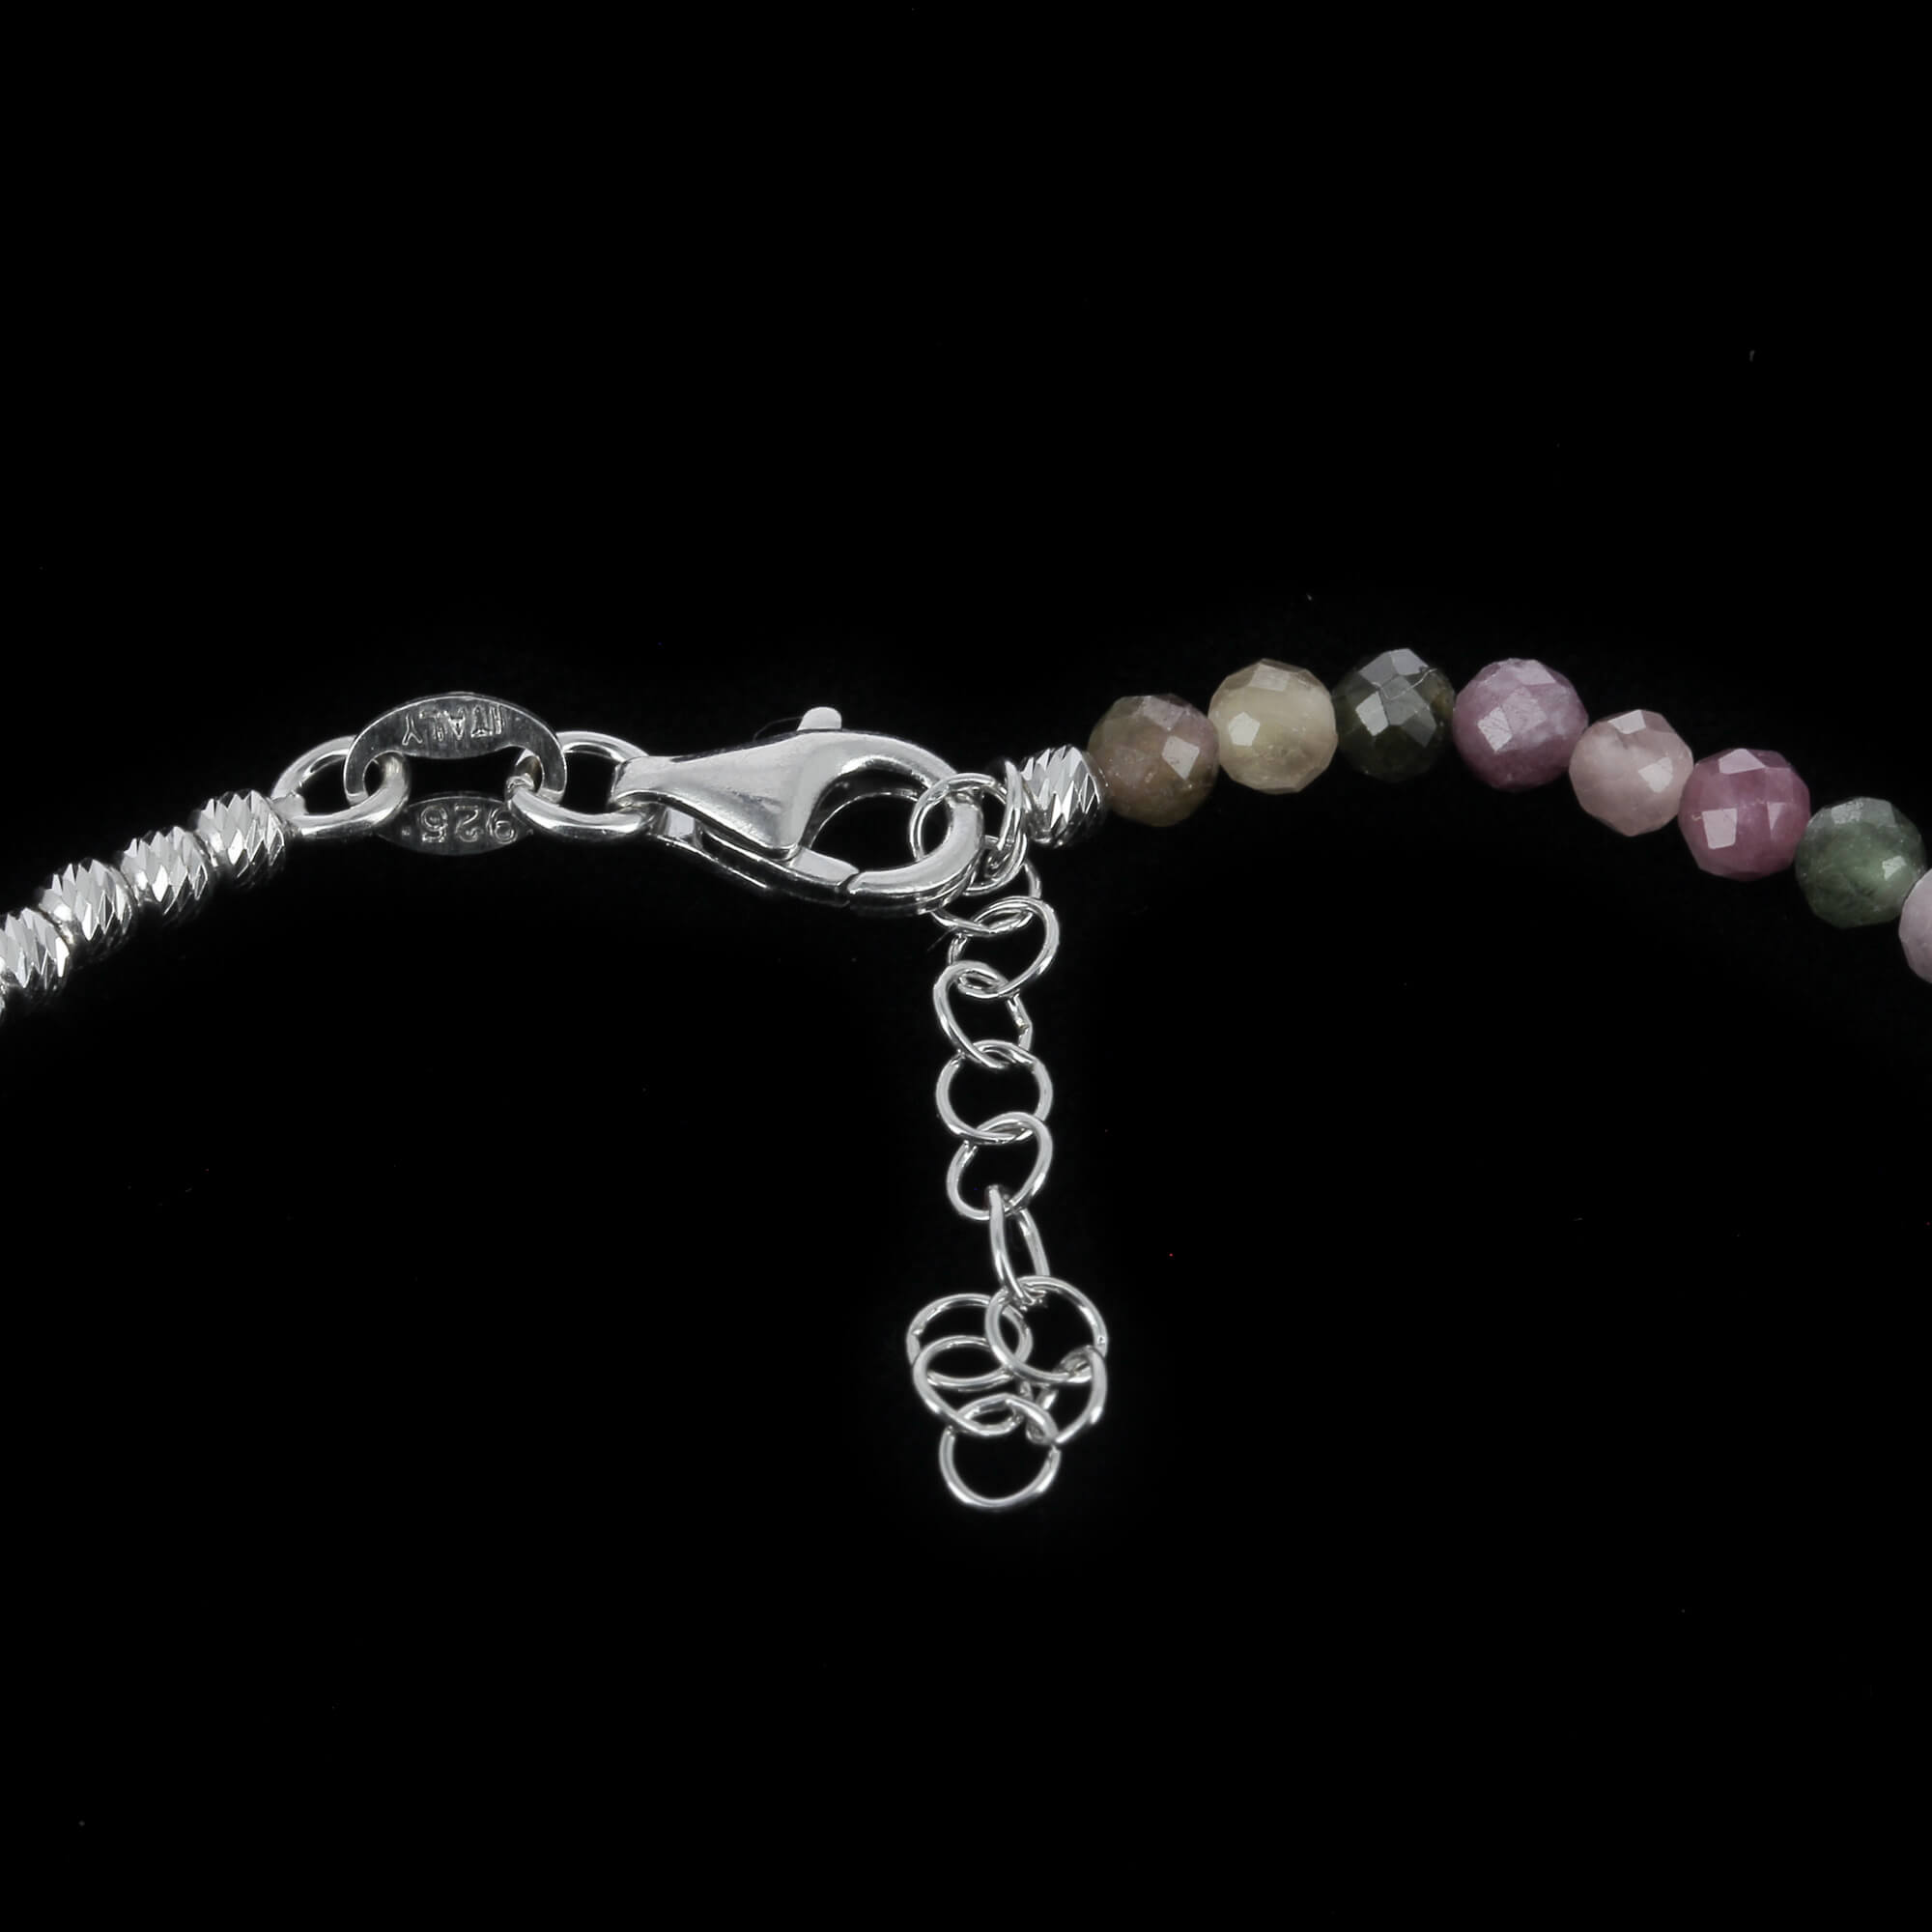 Silver bracelet 2.5 mm beads with color stones